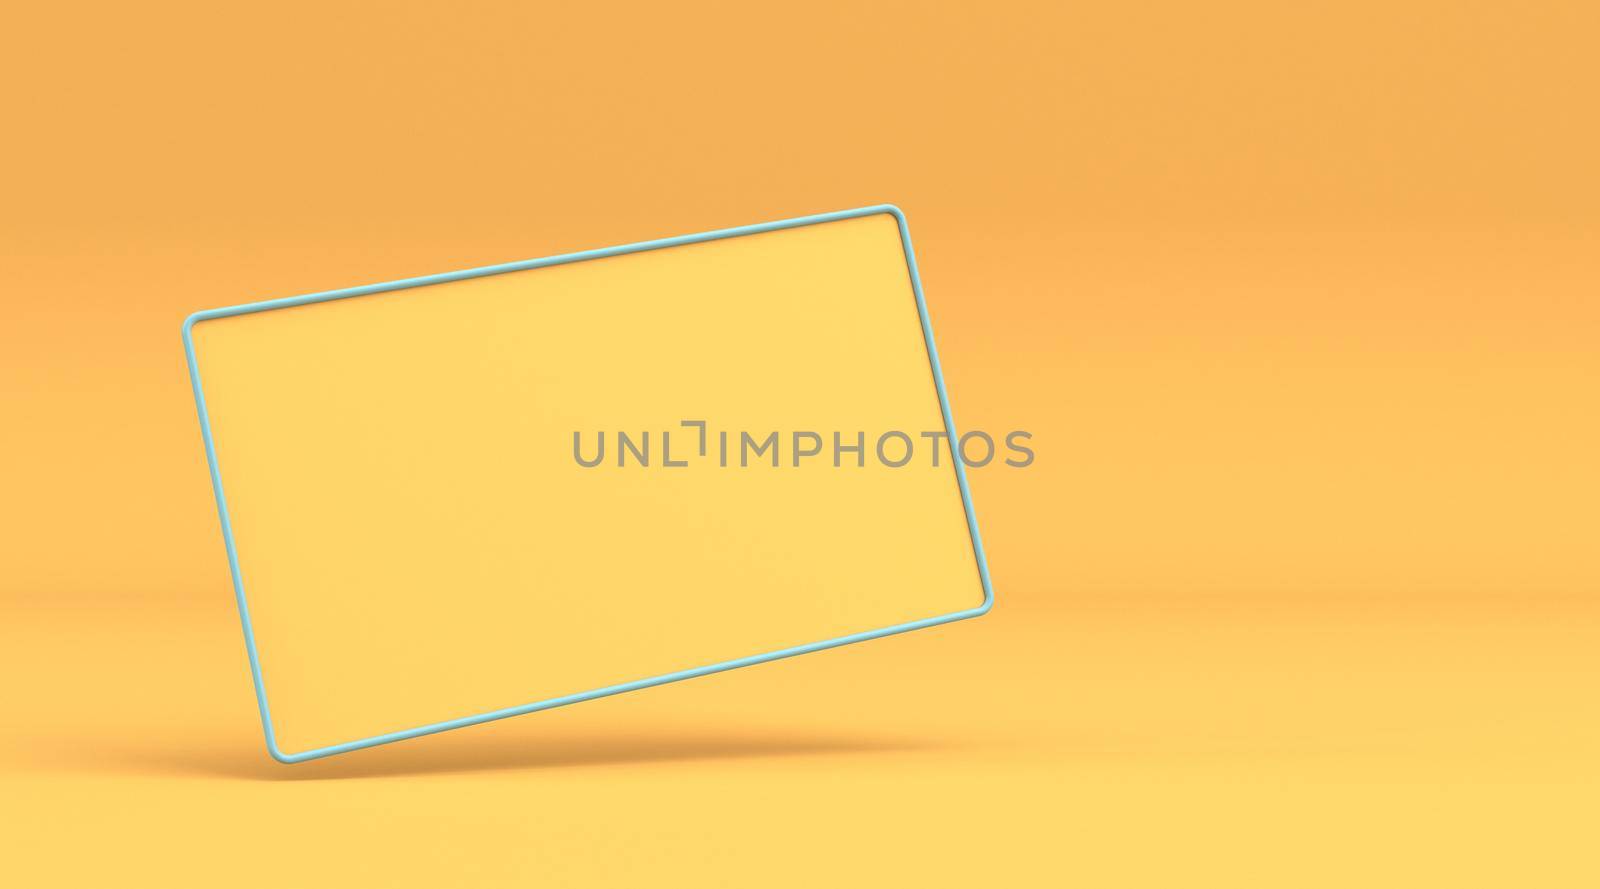 Blank yellow card with blue frame 3D rendering illustration isolated on yellow background